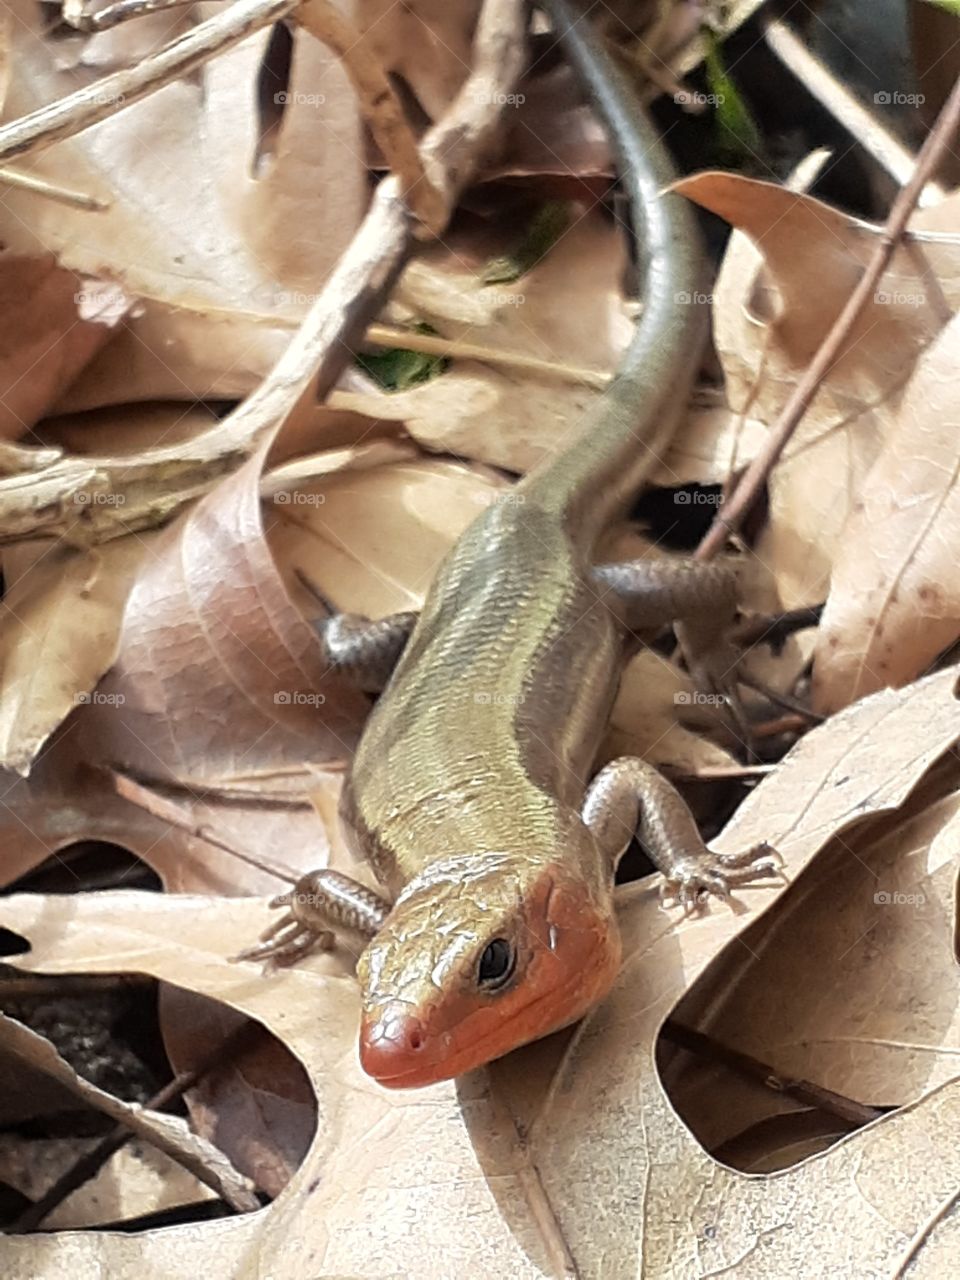 Red Throated Skink